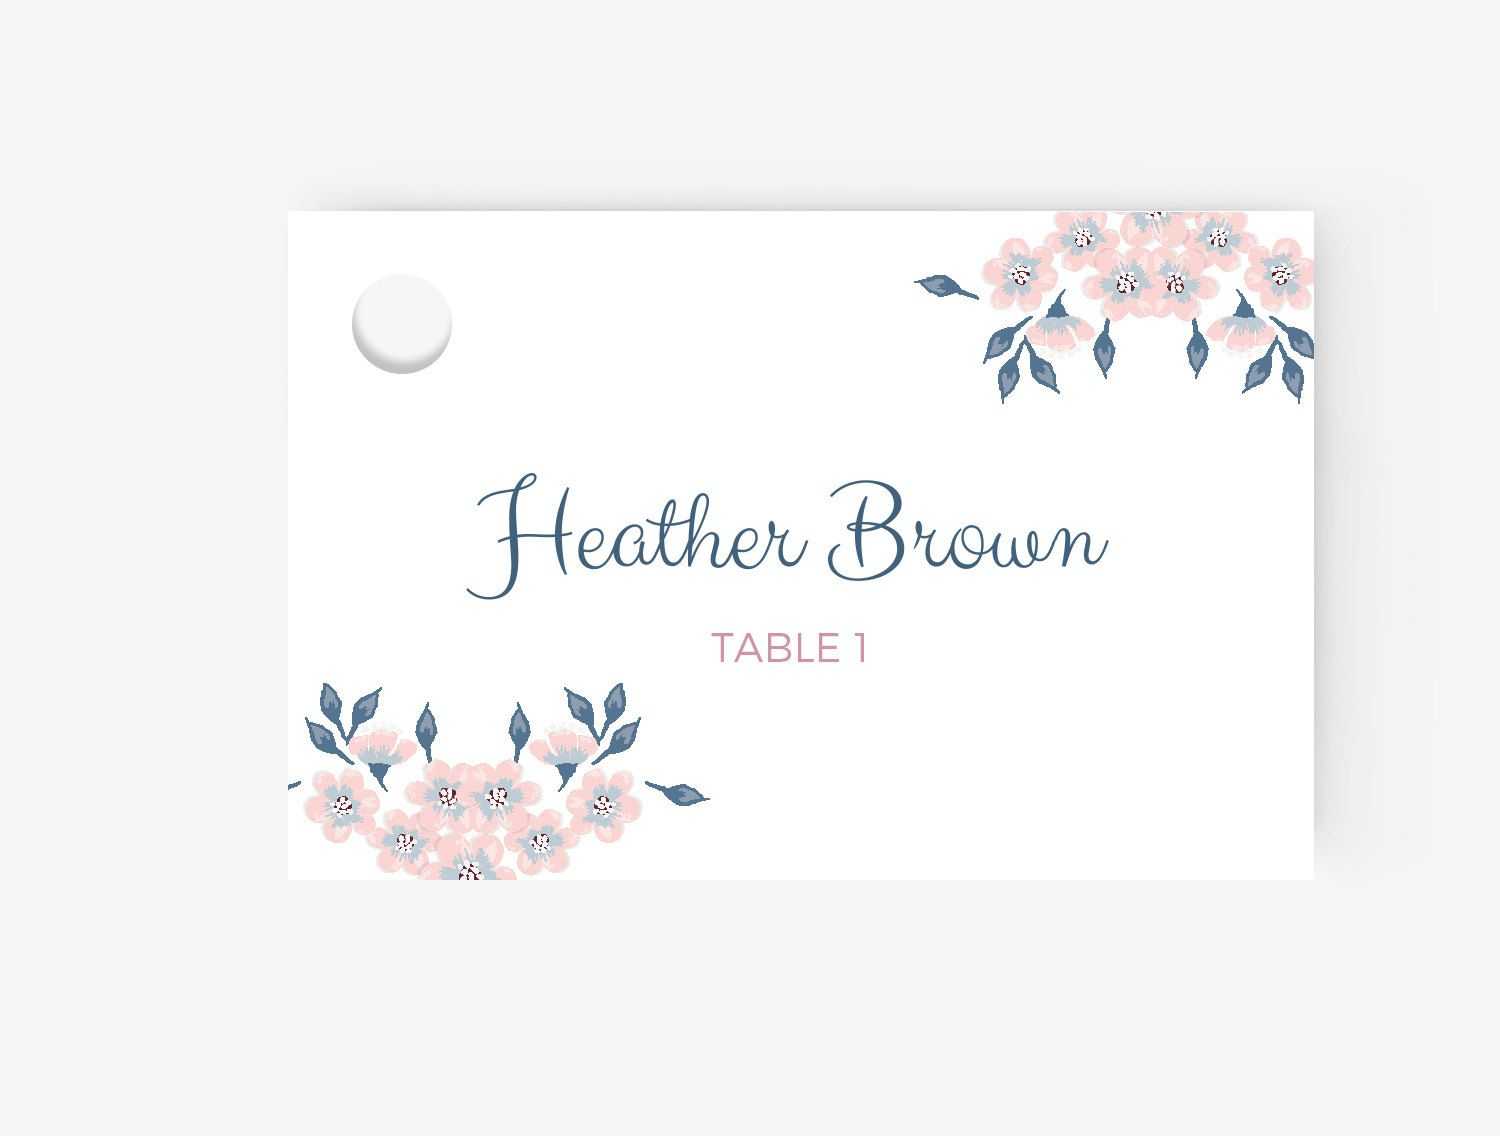 005 Free Place Card Template Ideas Cards Excellent Templates Pertaining To Free Place Card Templates Download